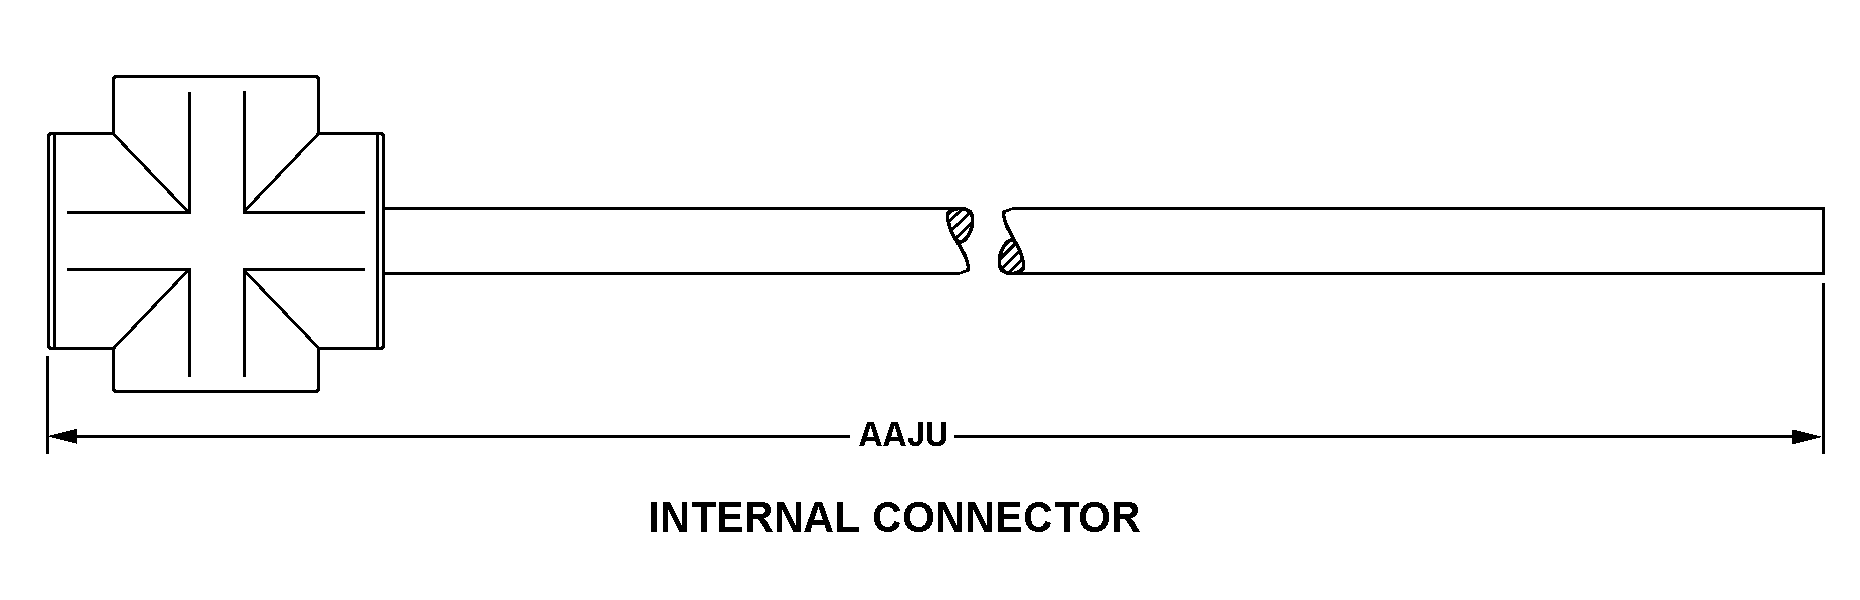 INTERNAL CONNECTOR style nsn 6150-01-242-0057